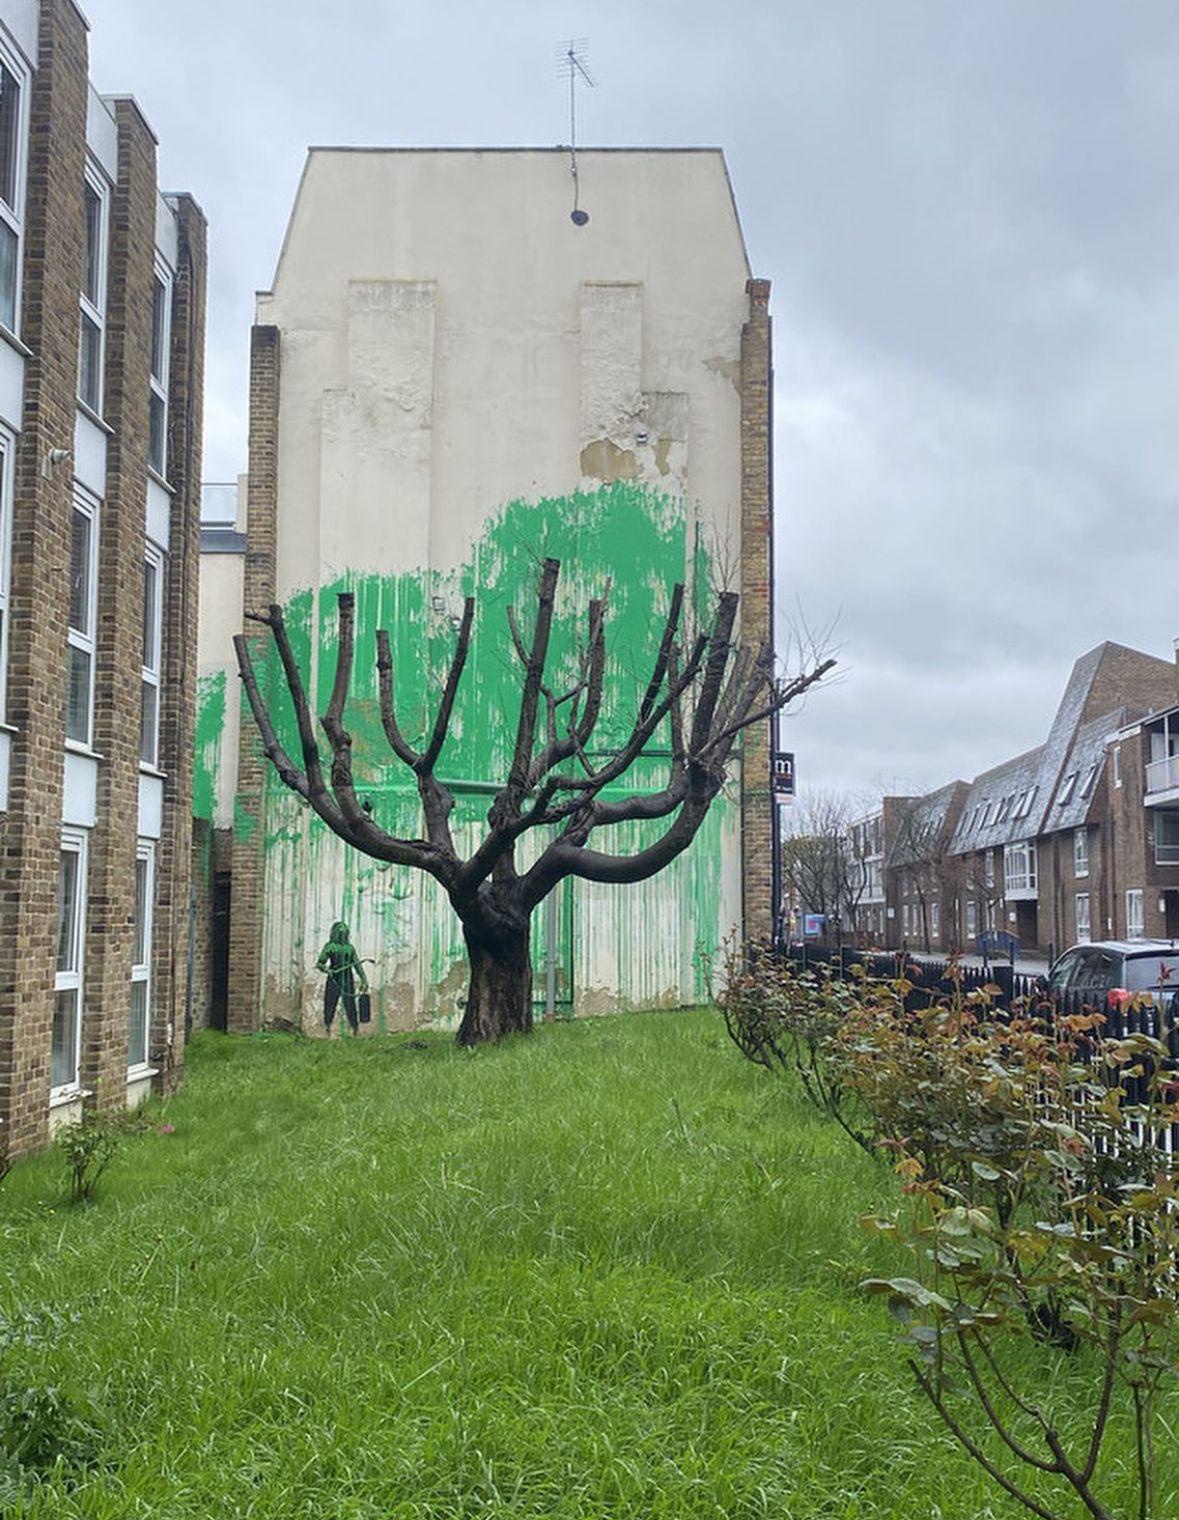 SPRING IS IN THE AIR?    Revealing his latest creation on social media,  the renowned artist shared both pre-and-post images of the mural located in Finsbury Park. The artwork features green spray paint mimicking foliage on a wall behind a pruned tree, with a stencilled figure holding a spray can of sorts nearby.   Residents and Banksy fans have flocked to view the  ew mural, with one local expressing pride in their neighbourhood being chosen as its backdrop. Wanja Sellers, a resident, described feeling a personal connection to the artwork, seeing it as a message directed at the area and borough.   Former Labour leader Jeremy Corbyn also expressed his delight at the mural's appearance in his constituency of Islington North. Acknowledging the necessity of green spaces in densely populated areas, Corbyn welcomed Banksy's contribution.     New Banksy London   GREEN FLAGS    According to James Peak, known for the BBC Radio 4 series The Banksy Story, the mural features a striking contrast of green paint on a white wall, accompanied by Banksy's characteristic stencil style.   The green paint matches that used by Islington Council for local signage, demonstrating Banksy's attention to detail. Peak speculated that Banksy likely employed a pressure hose or fire extinguisher for the creation process due to the dripping effect of the paint on the wall and it’s energetic, rough style which contrasts to the neat figure underneath the faux-blossom.      New Banksy London   The mural, depicting a burst of synthetic greenery, is seen by some as a commentary on the lack of natural spaces in urban environments.   Prior to Banksy confirming his authorship, Islington councillor Flora Williamson expressed excitement about the possibility of having a Banksy artwork in the area.   Islington Council has no plans to remove the mural, recognizing its cultural significance and the artist's intent.   The artwork incorporates a cherry tree in the foreground, estimated to be 40-50 years old and in declining health, prompting the council to ensure its preservation.   Banksy typically confirms his works on social media, and in this case, he posted images of the mural on Instagram without any commentary.   Banksy's identity remains a mystery, despite his global fame, with notable works including Kissing Coppers and the notorious shredded Girl with Balloon. We explore theories about Banksy in our blog “Who is Banksy?”   Incorporating a tree into his latest creation, Banksy has seemingly thwarted attempts at theft, as removing the artwork would also entail removing the tree itself. Prior to this work, Banksy creed a stop sign back in December which was promptly removed and stolen within 25 minutes of first appearing.   For more information on our Banksy original art for sale or to speak to a member of our gallery, contact sales@andipa.com or call +44 (0)20 7581 1244.